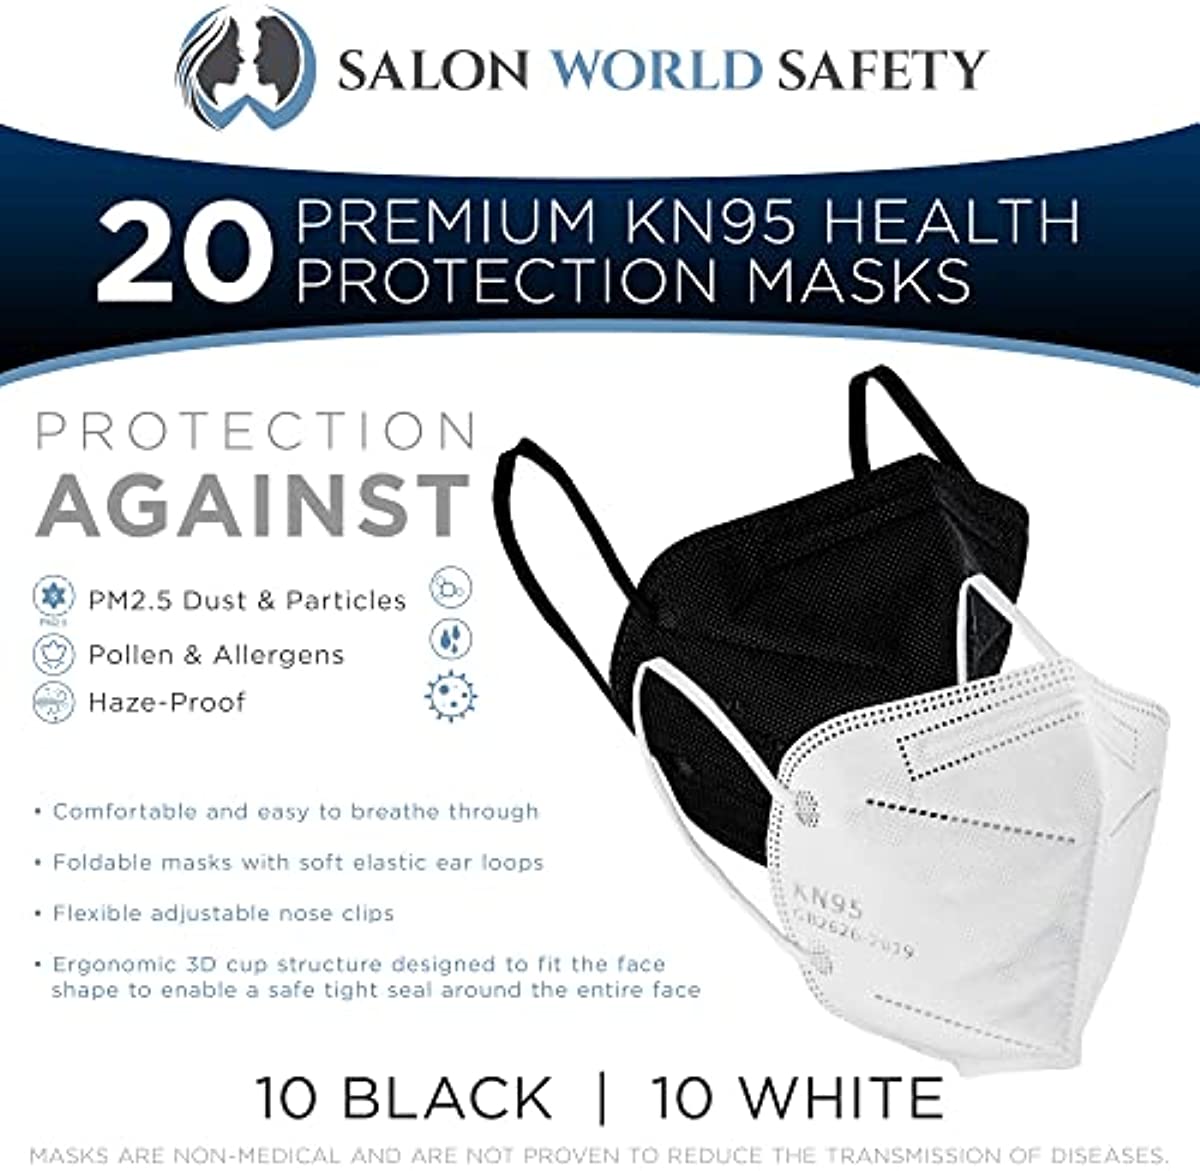 Salon World Safety KN95 Protective Masks, Pack of 10 White & 10 Black - Filter Efficiency ≥95{7743b21248fa991483b9d7641caef7182f78749537ff5e9d42bc316e1bc2c0be}, 5-Layers, Sanitary 5-Ply Non-Woven Fabric, Safe, Easy Breathing